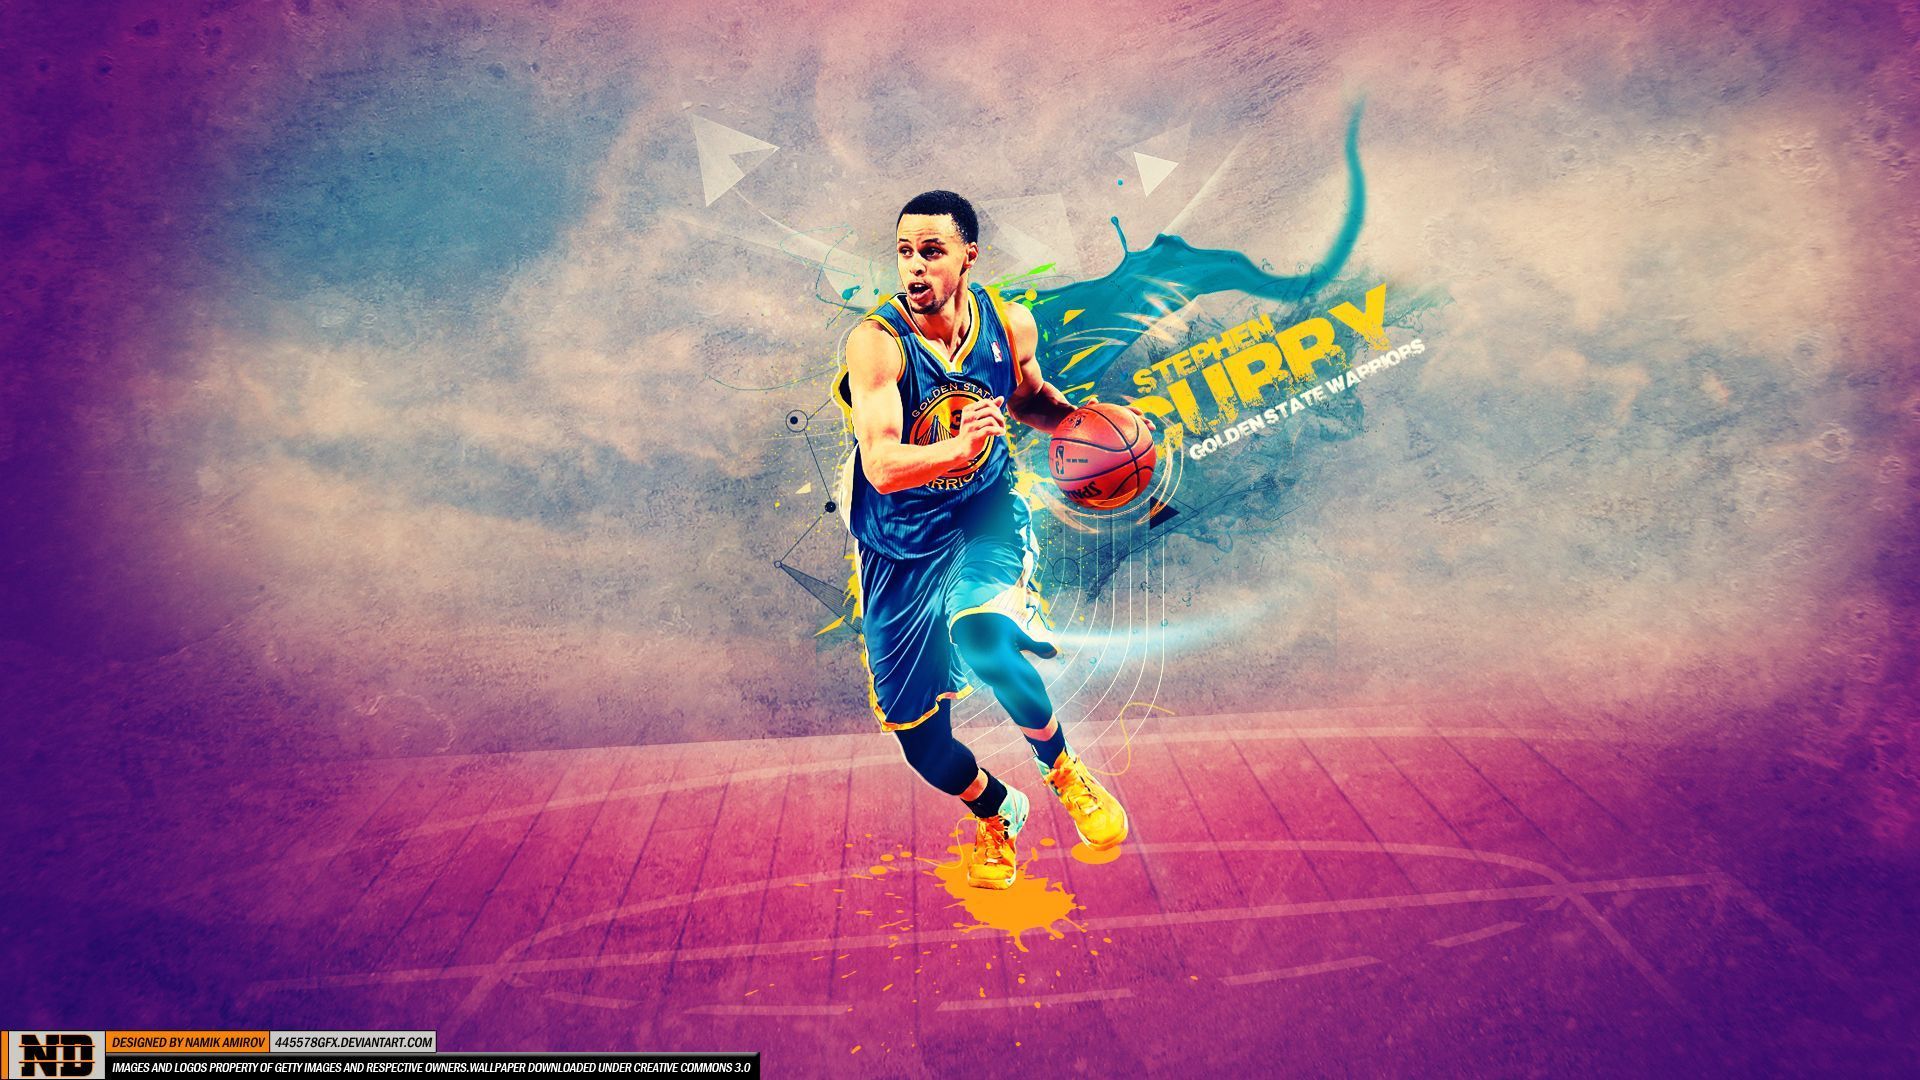 Stephen Curry Wallpaper Image Search - Free Wallpaper Page